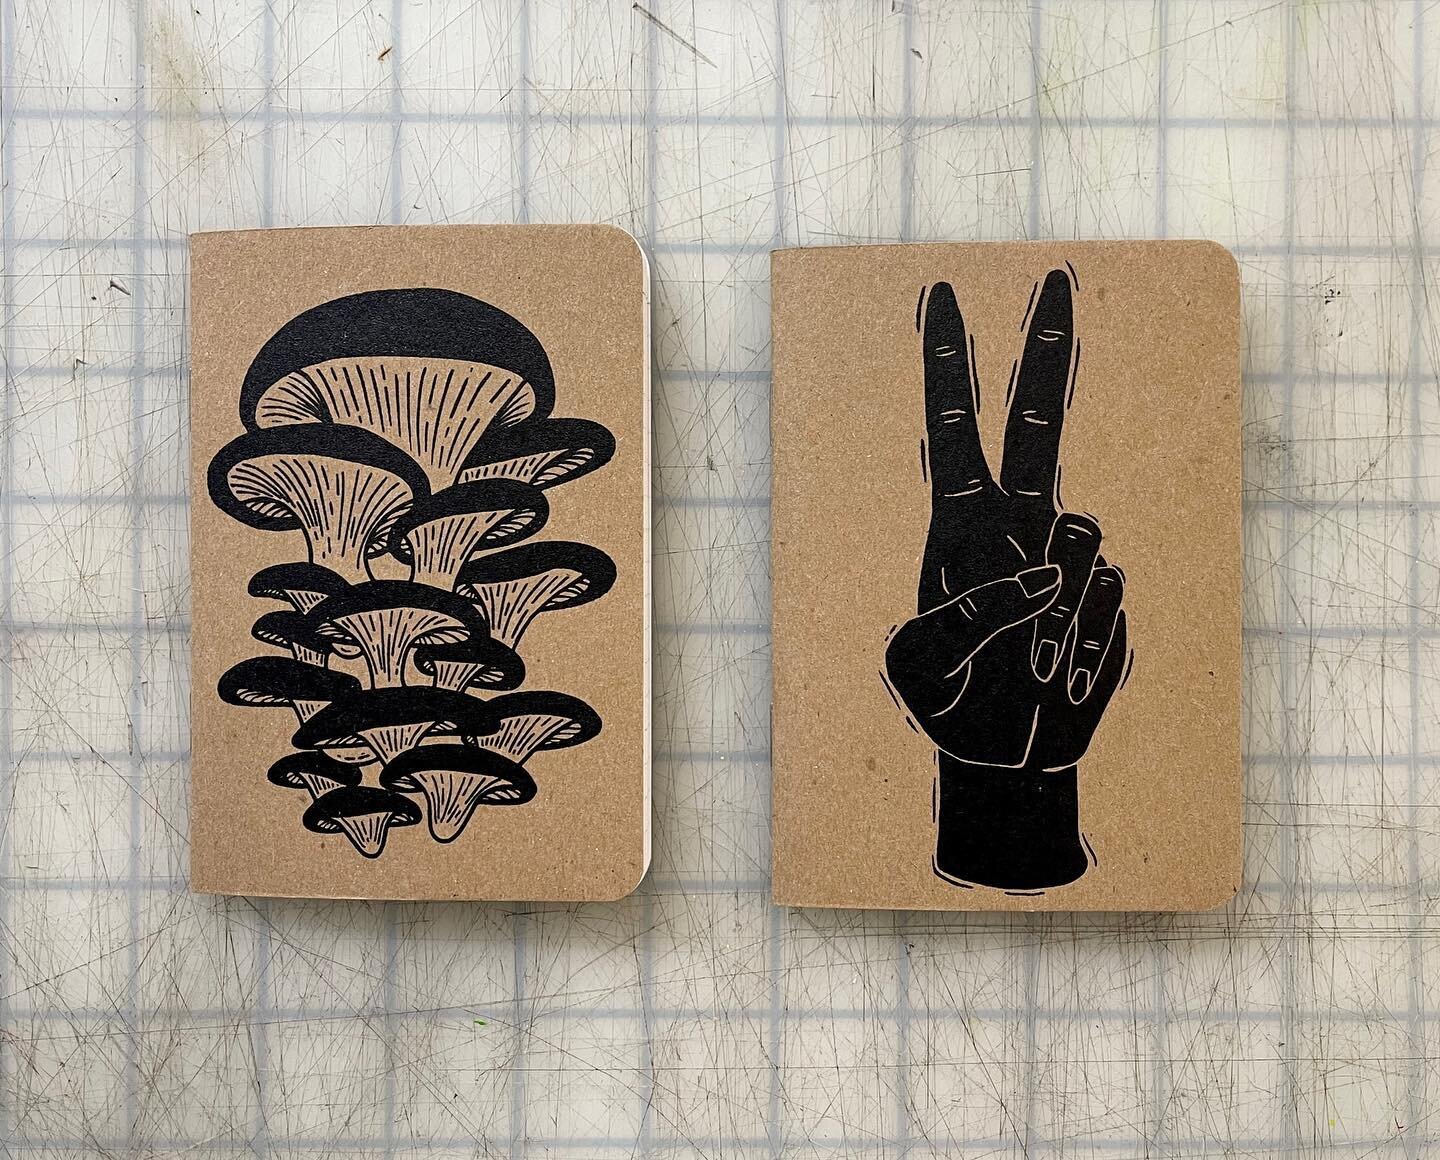 Last night I screen printed two new pocket-sized notebooks. Eeeah! I&rsquo;m obsessed! Come find me @portlandnightmarket Dec 1st - Dec 4th. It&rsquo;s gonna be a real good time. 🖤
.
.
.
.
#printmaking #screenprint #handmade #pnwartist #makersgonnama